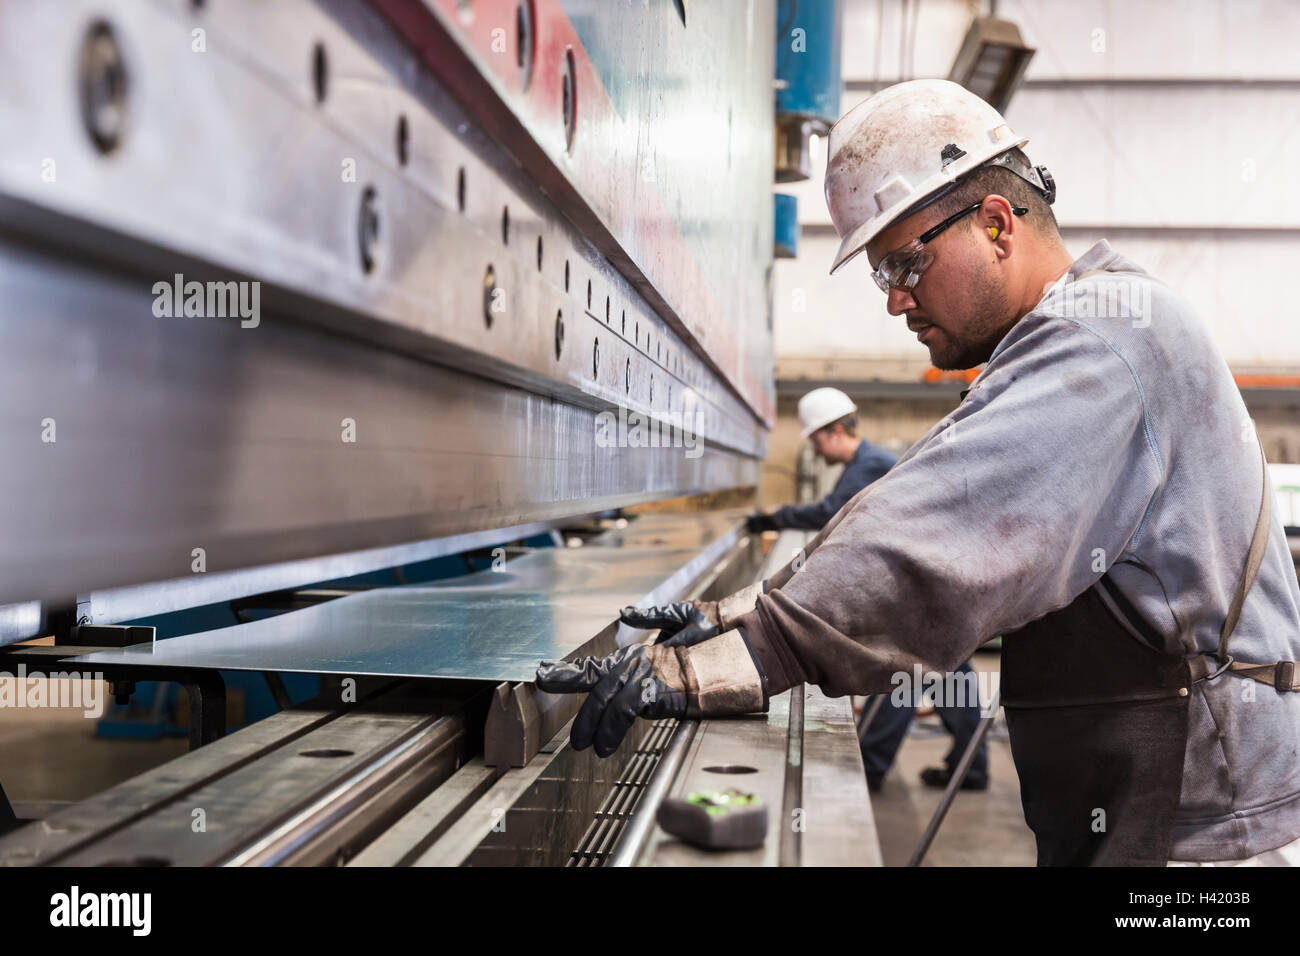 Workers fabricating metal in factory Stock Photo